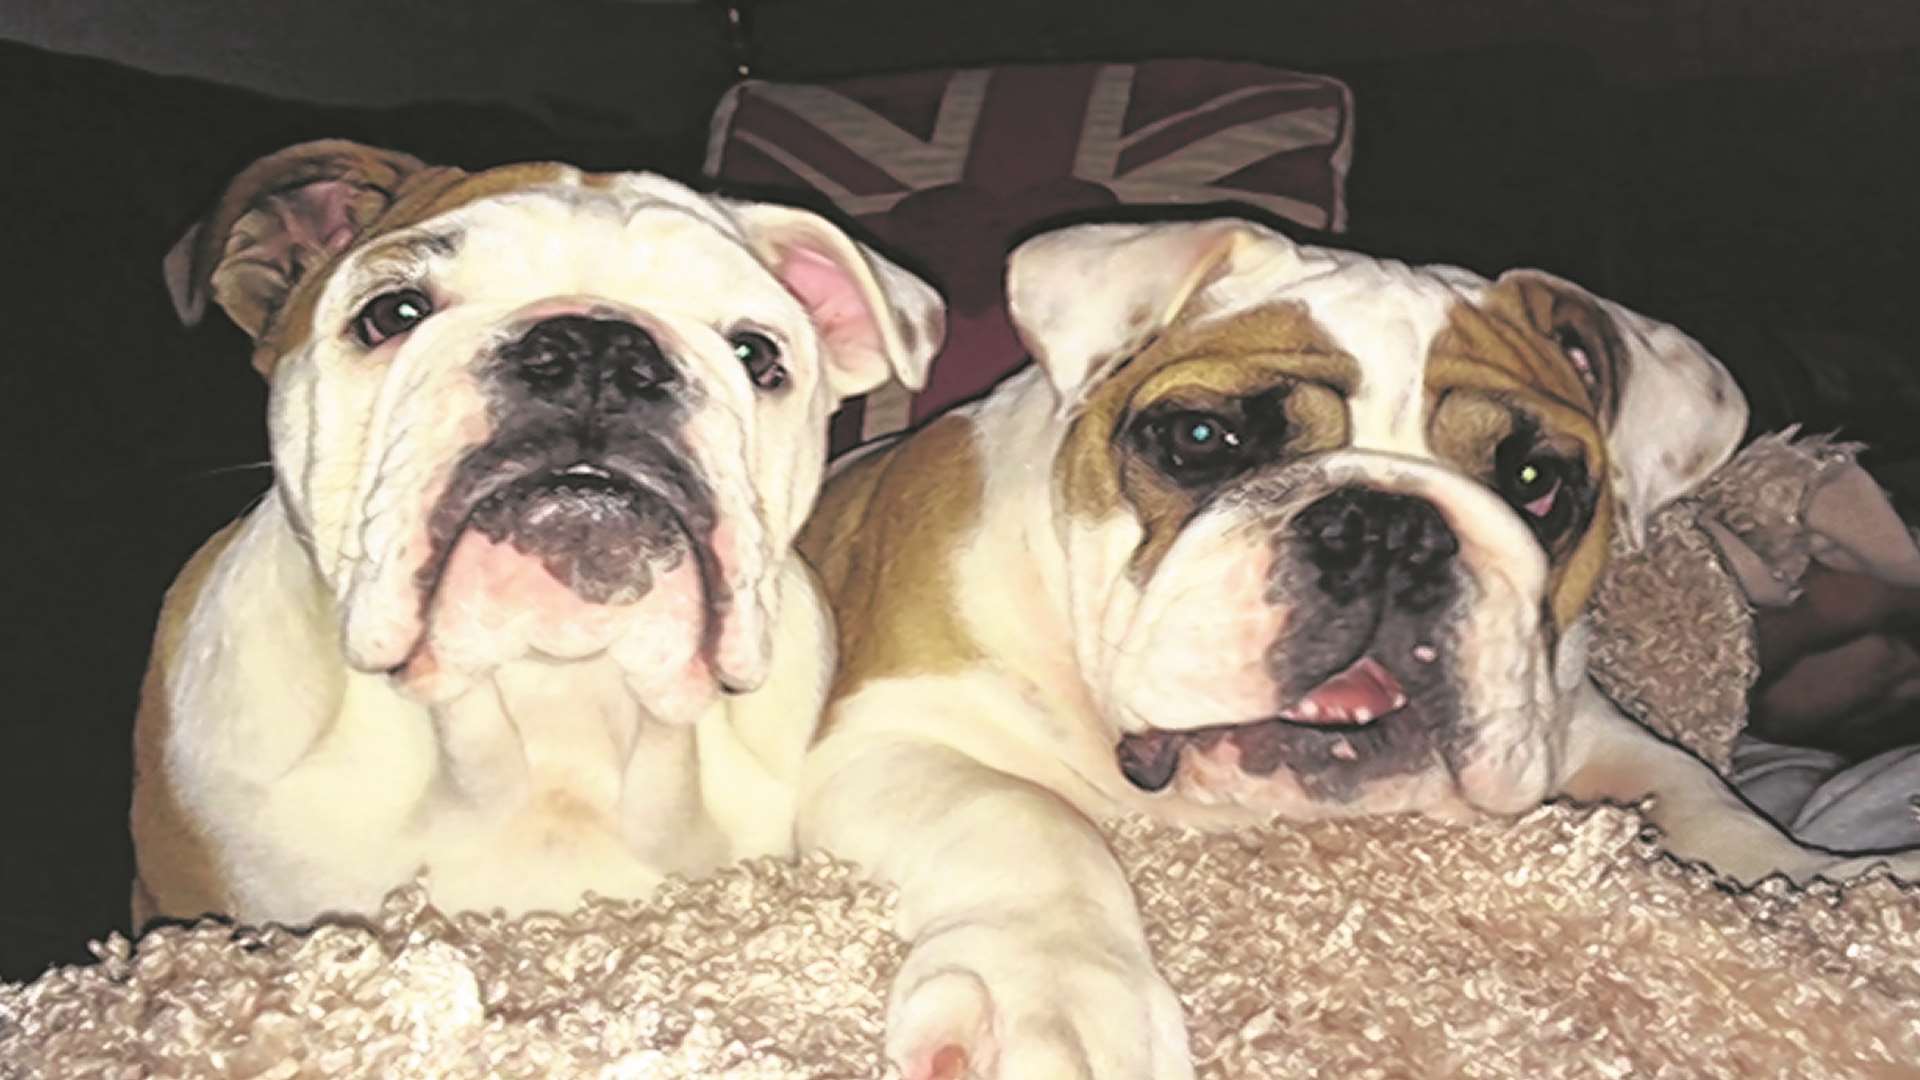 17-month-old bulldogs Harry and Frank were poisoned after allegedly eating food laced with rat poison in a Ramsgate park